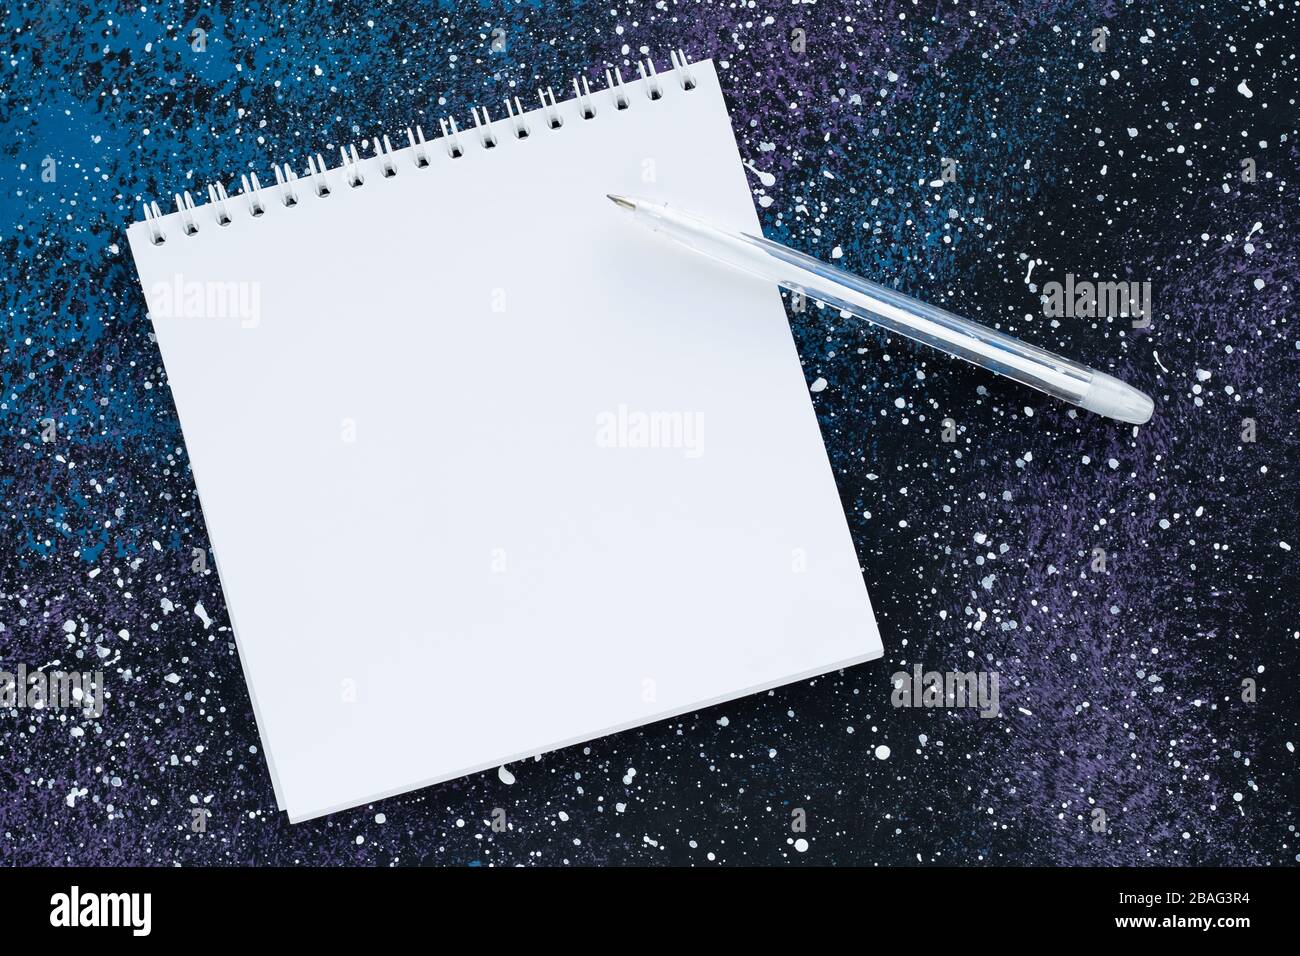 Blank spiral notebook with copy space for text on abstract dark blue background. Planning concept. White paper page and pen, empty sheet, mockup Stock Photo